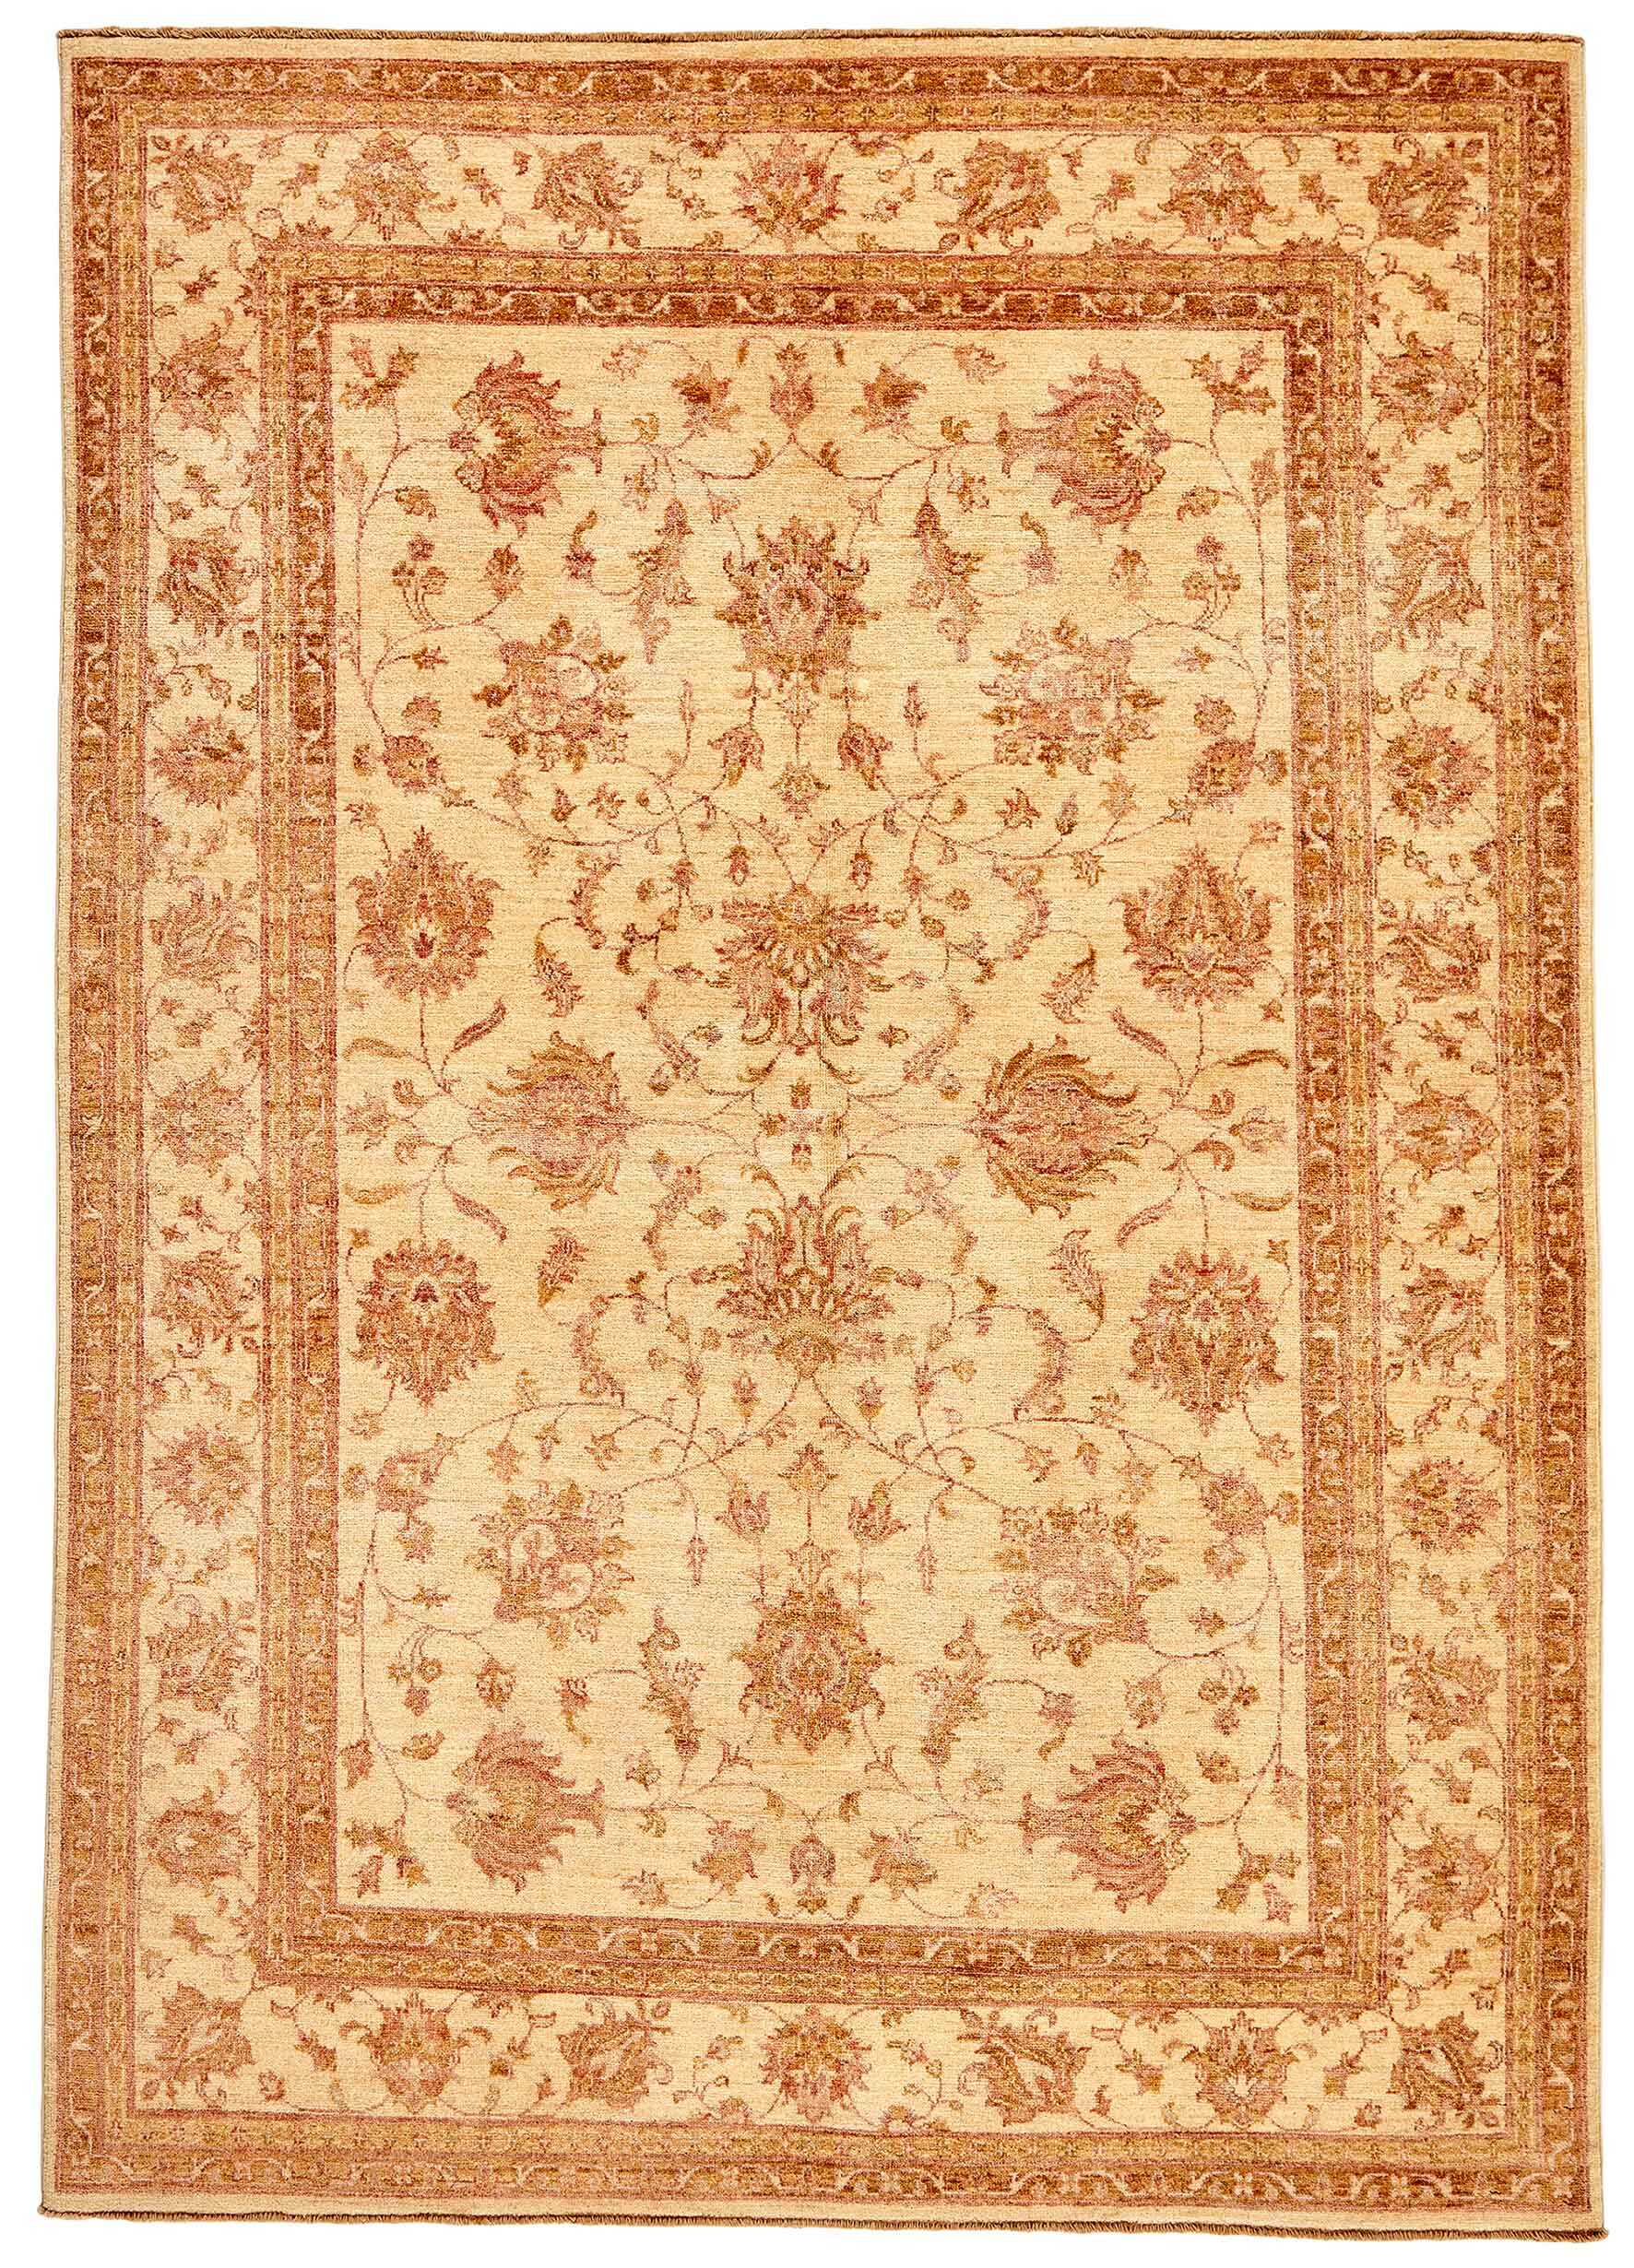 oriental rug with red and beige floral pattern